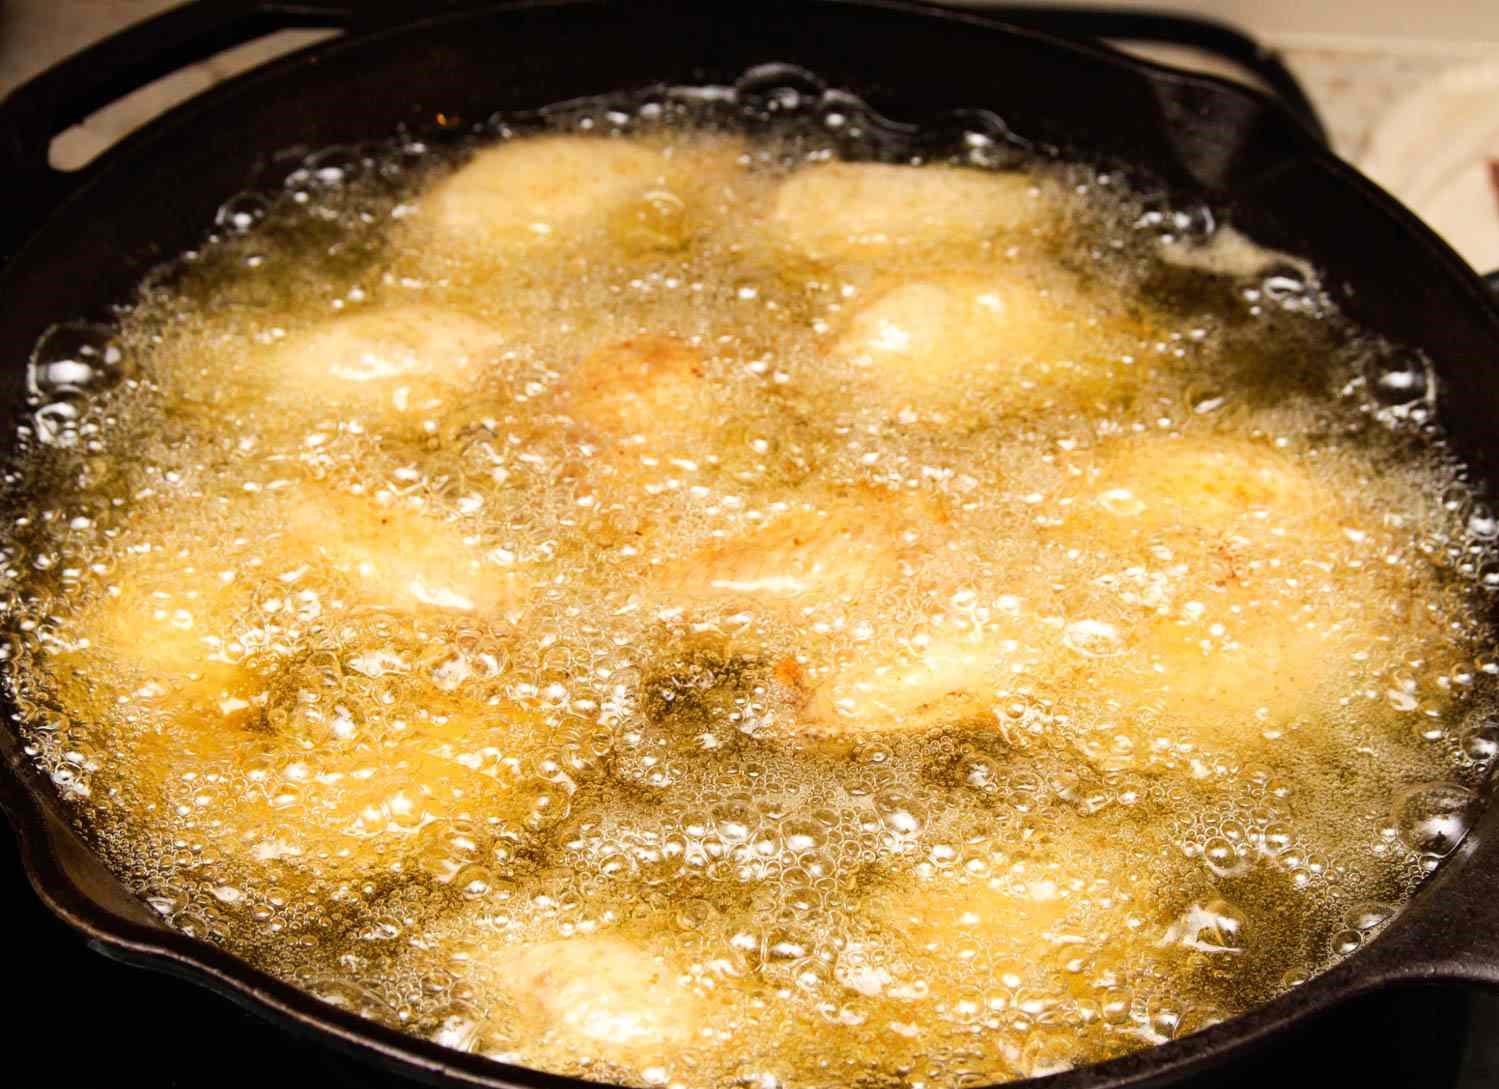 How Long Does It Take To Fry Chicken Wings In Electric Skillet?